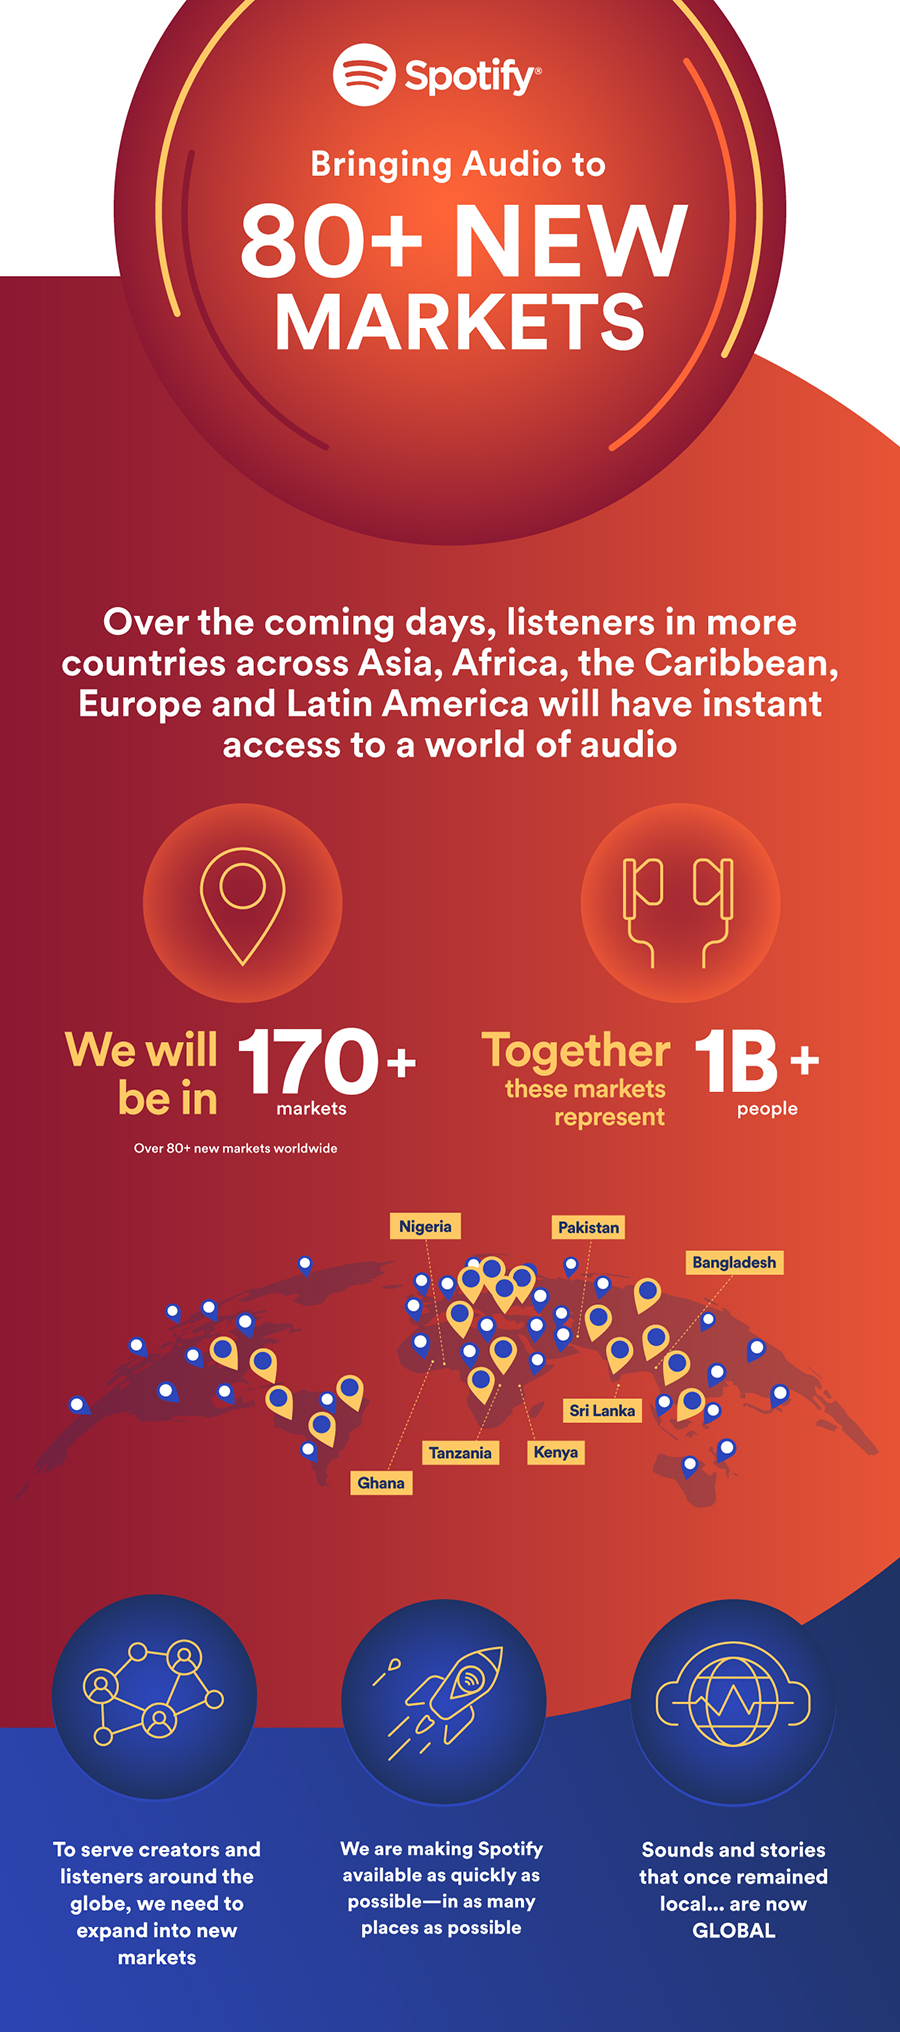 Spotify Expands International Footprint, Bringing Audio To 80+ New Markets